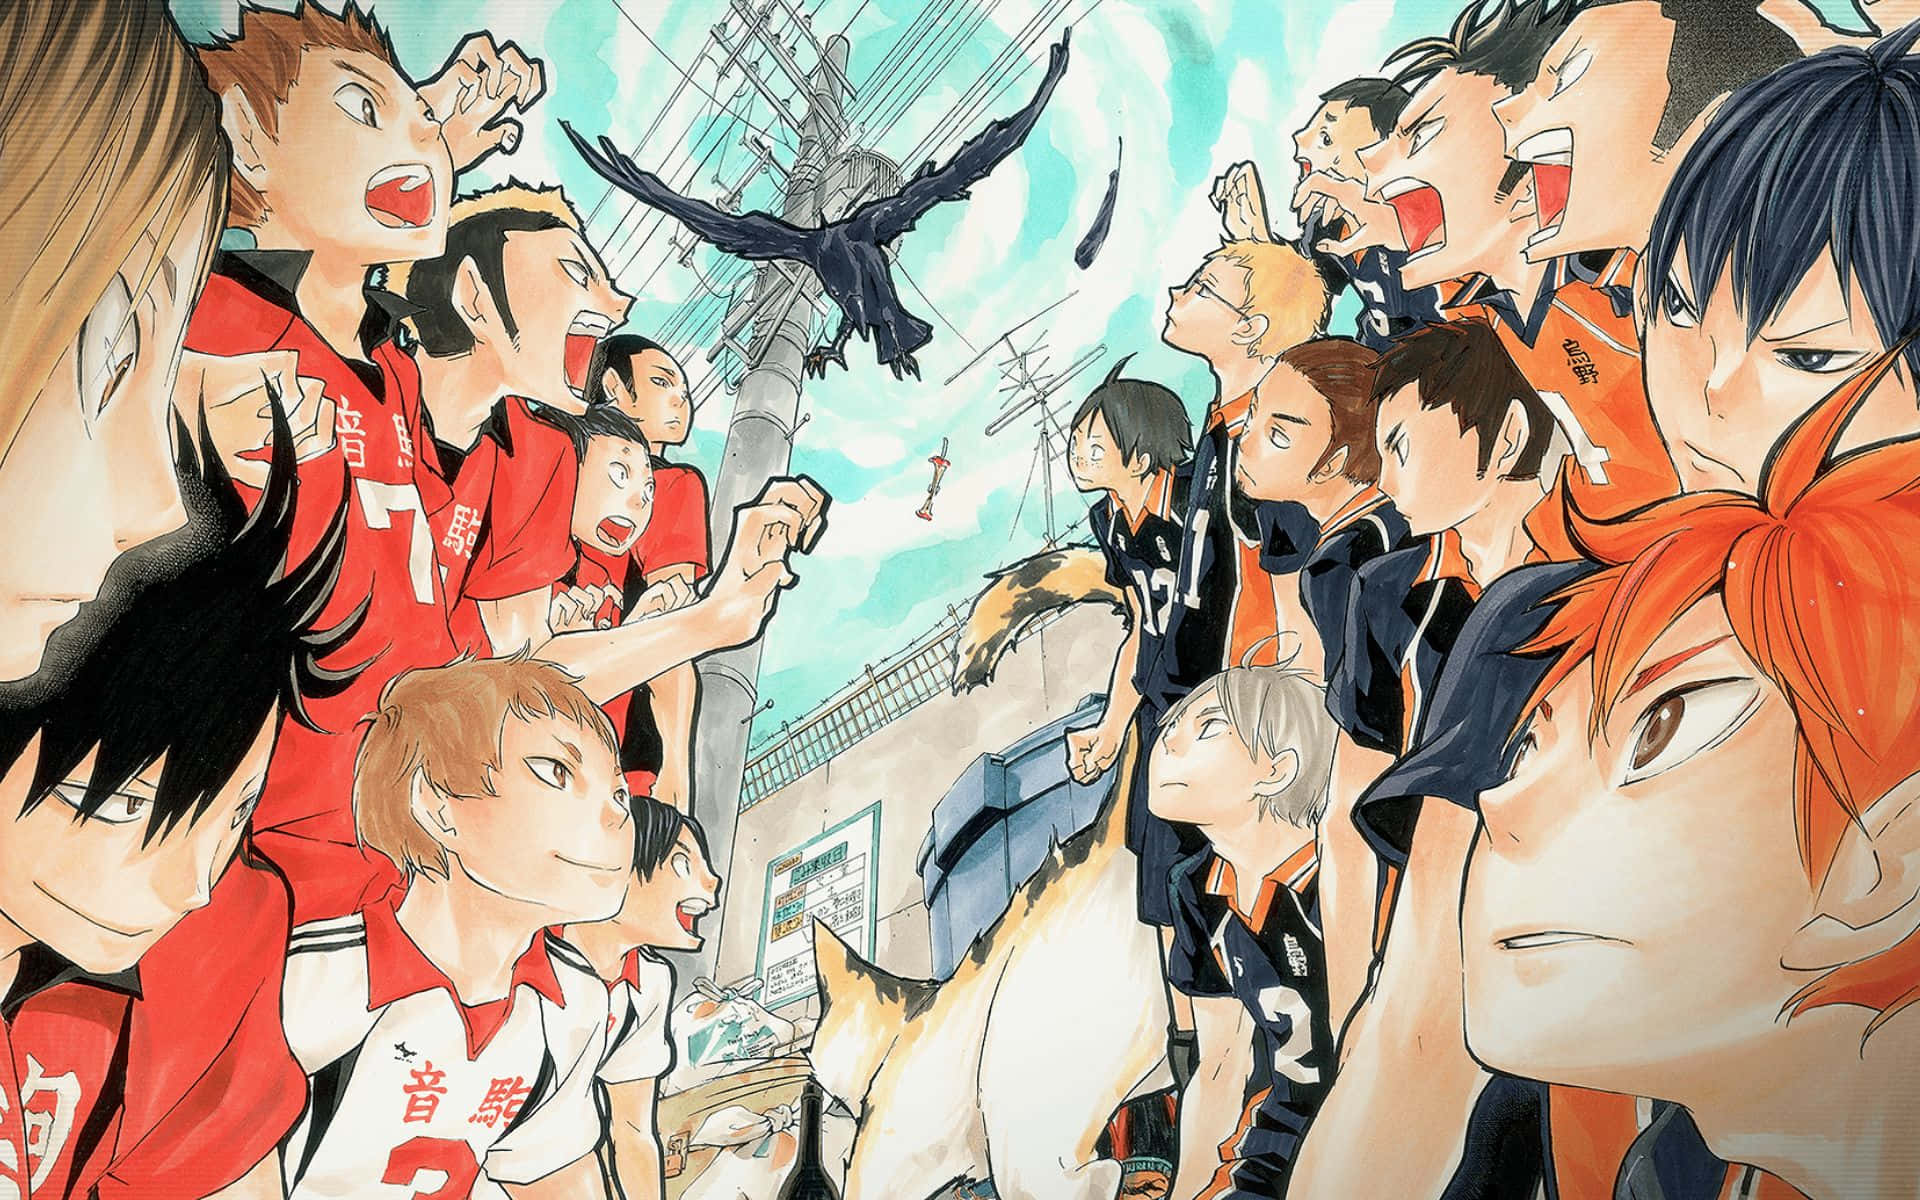 Lev Haiba soaring high during a volleyball match. Wallpaper